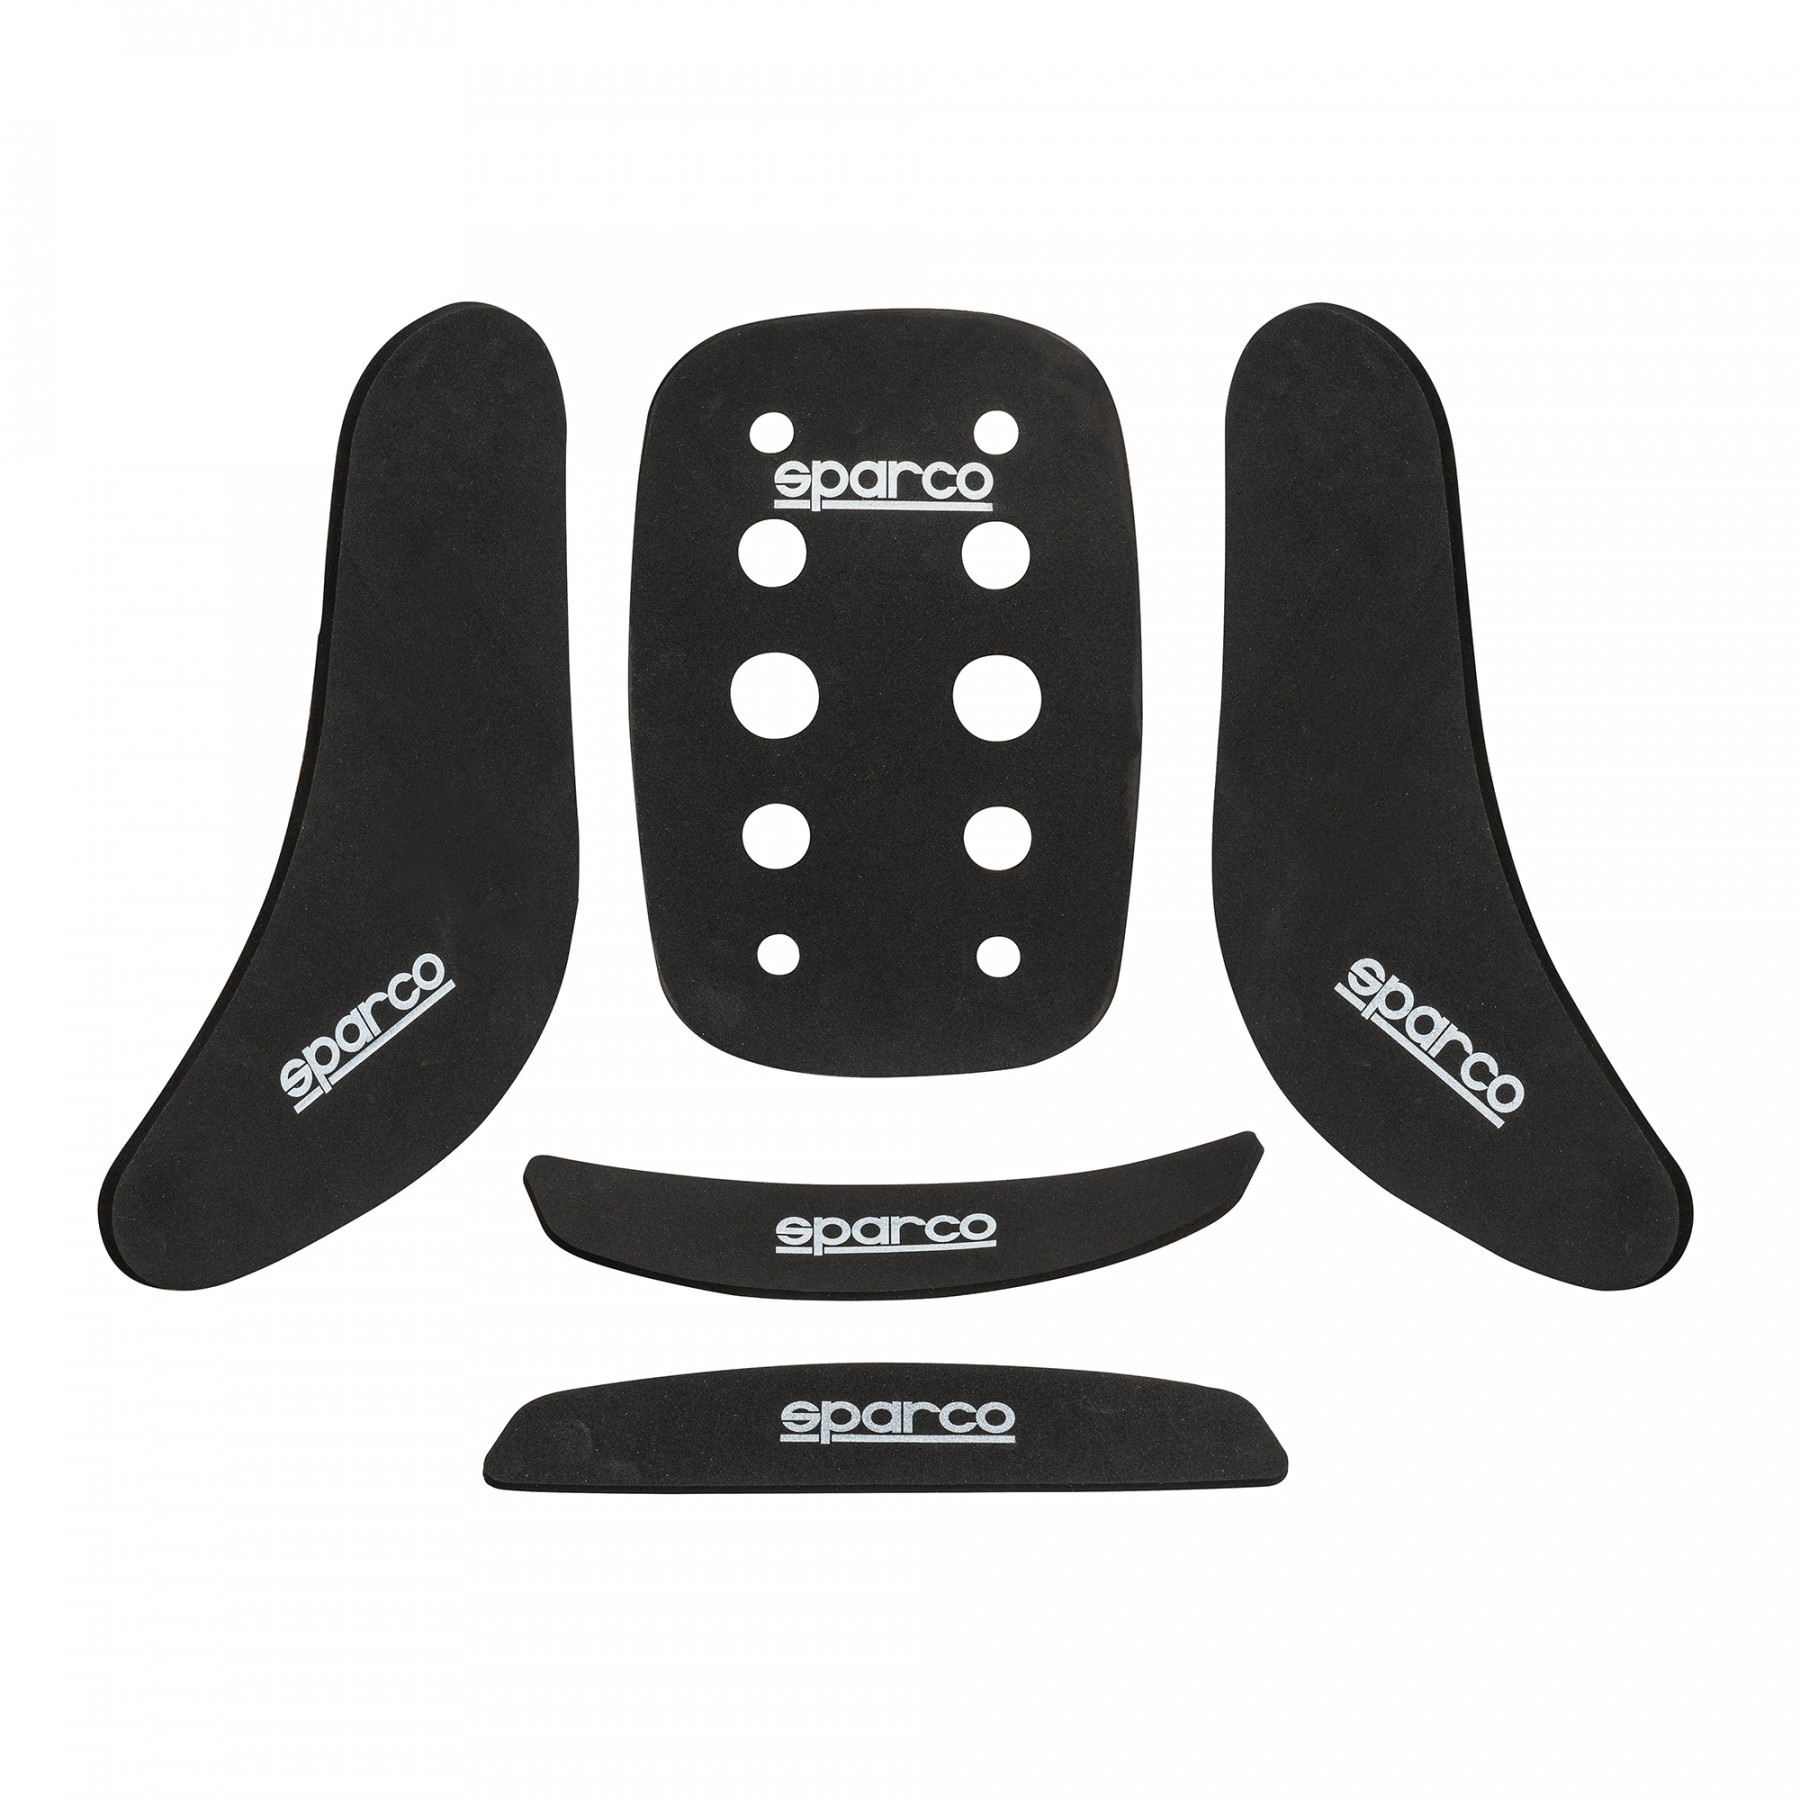 Seat padding kit from Sparco